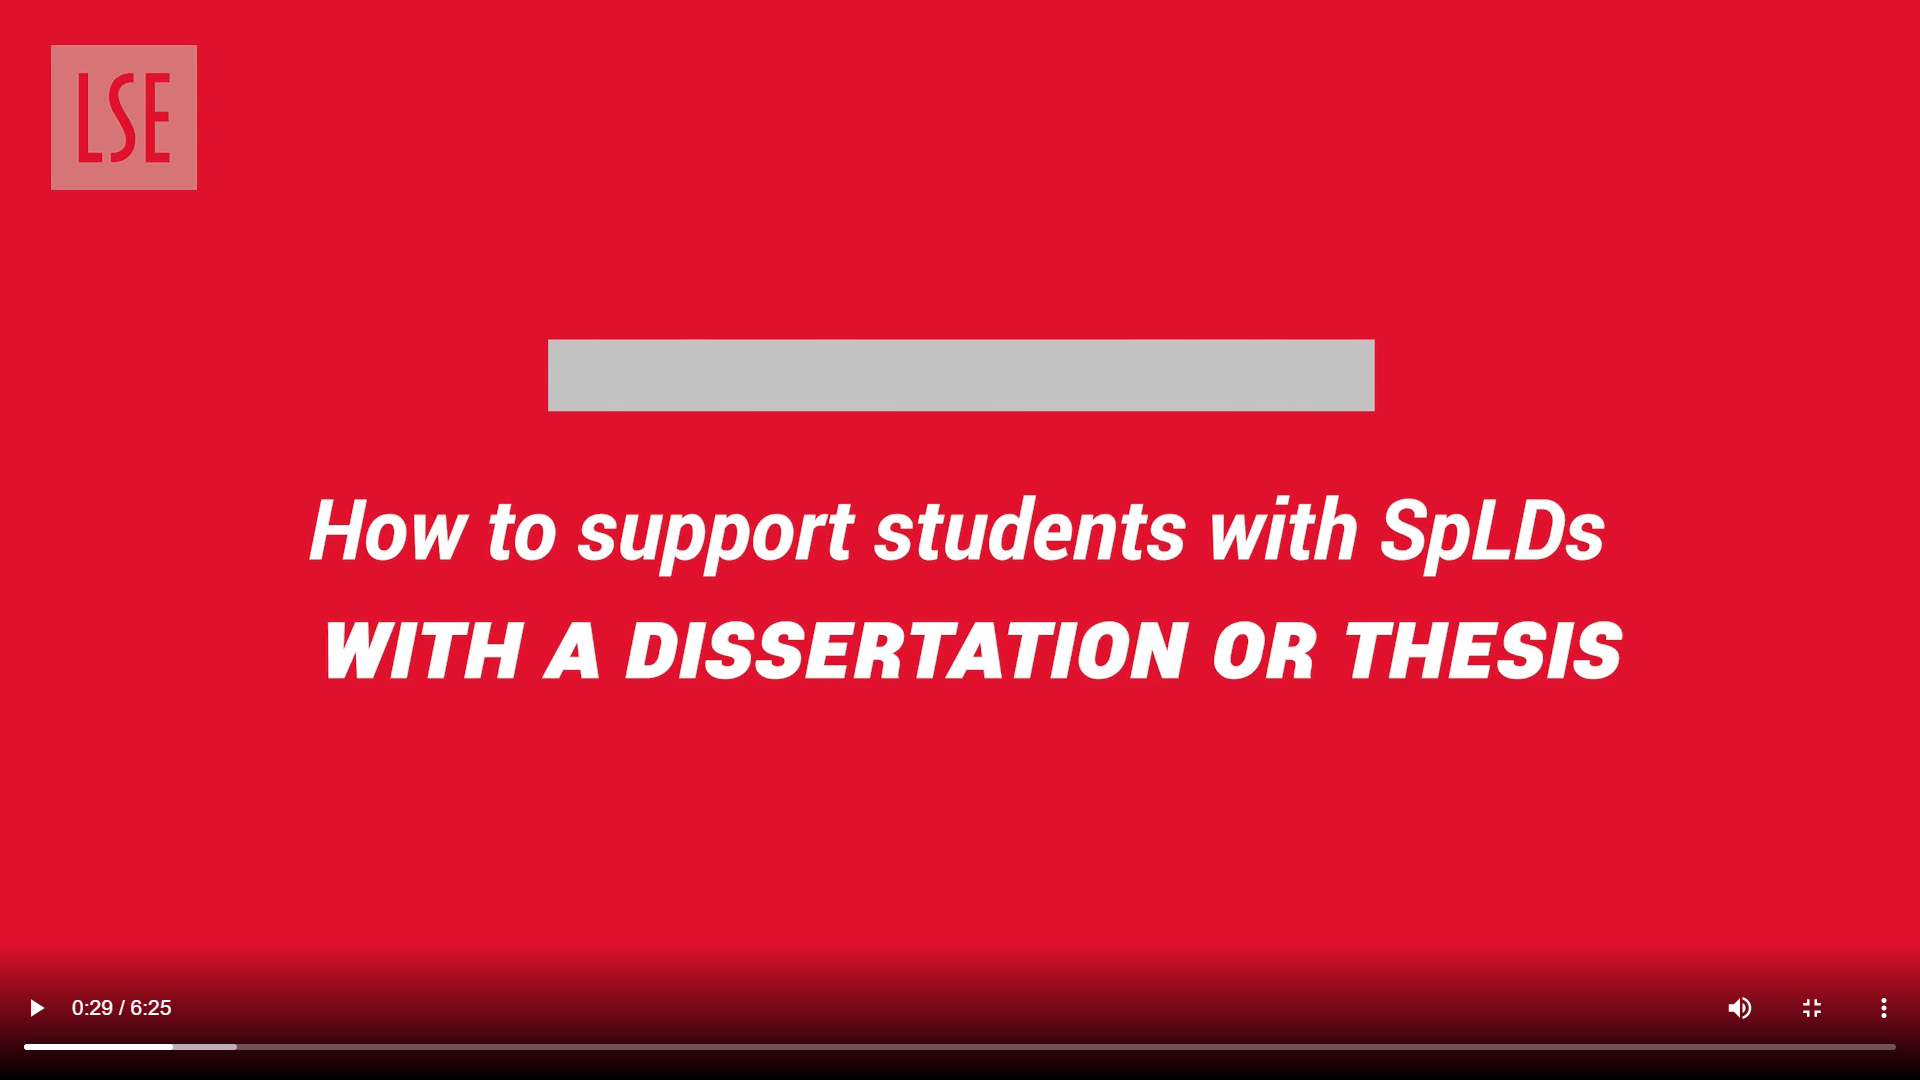 Supporting students through their dissertation/thesis